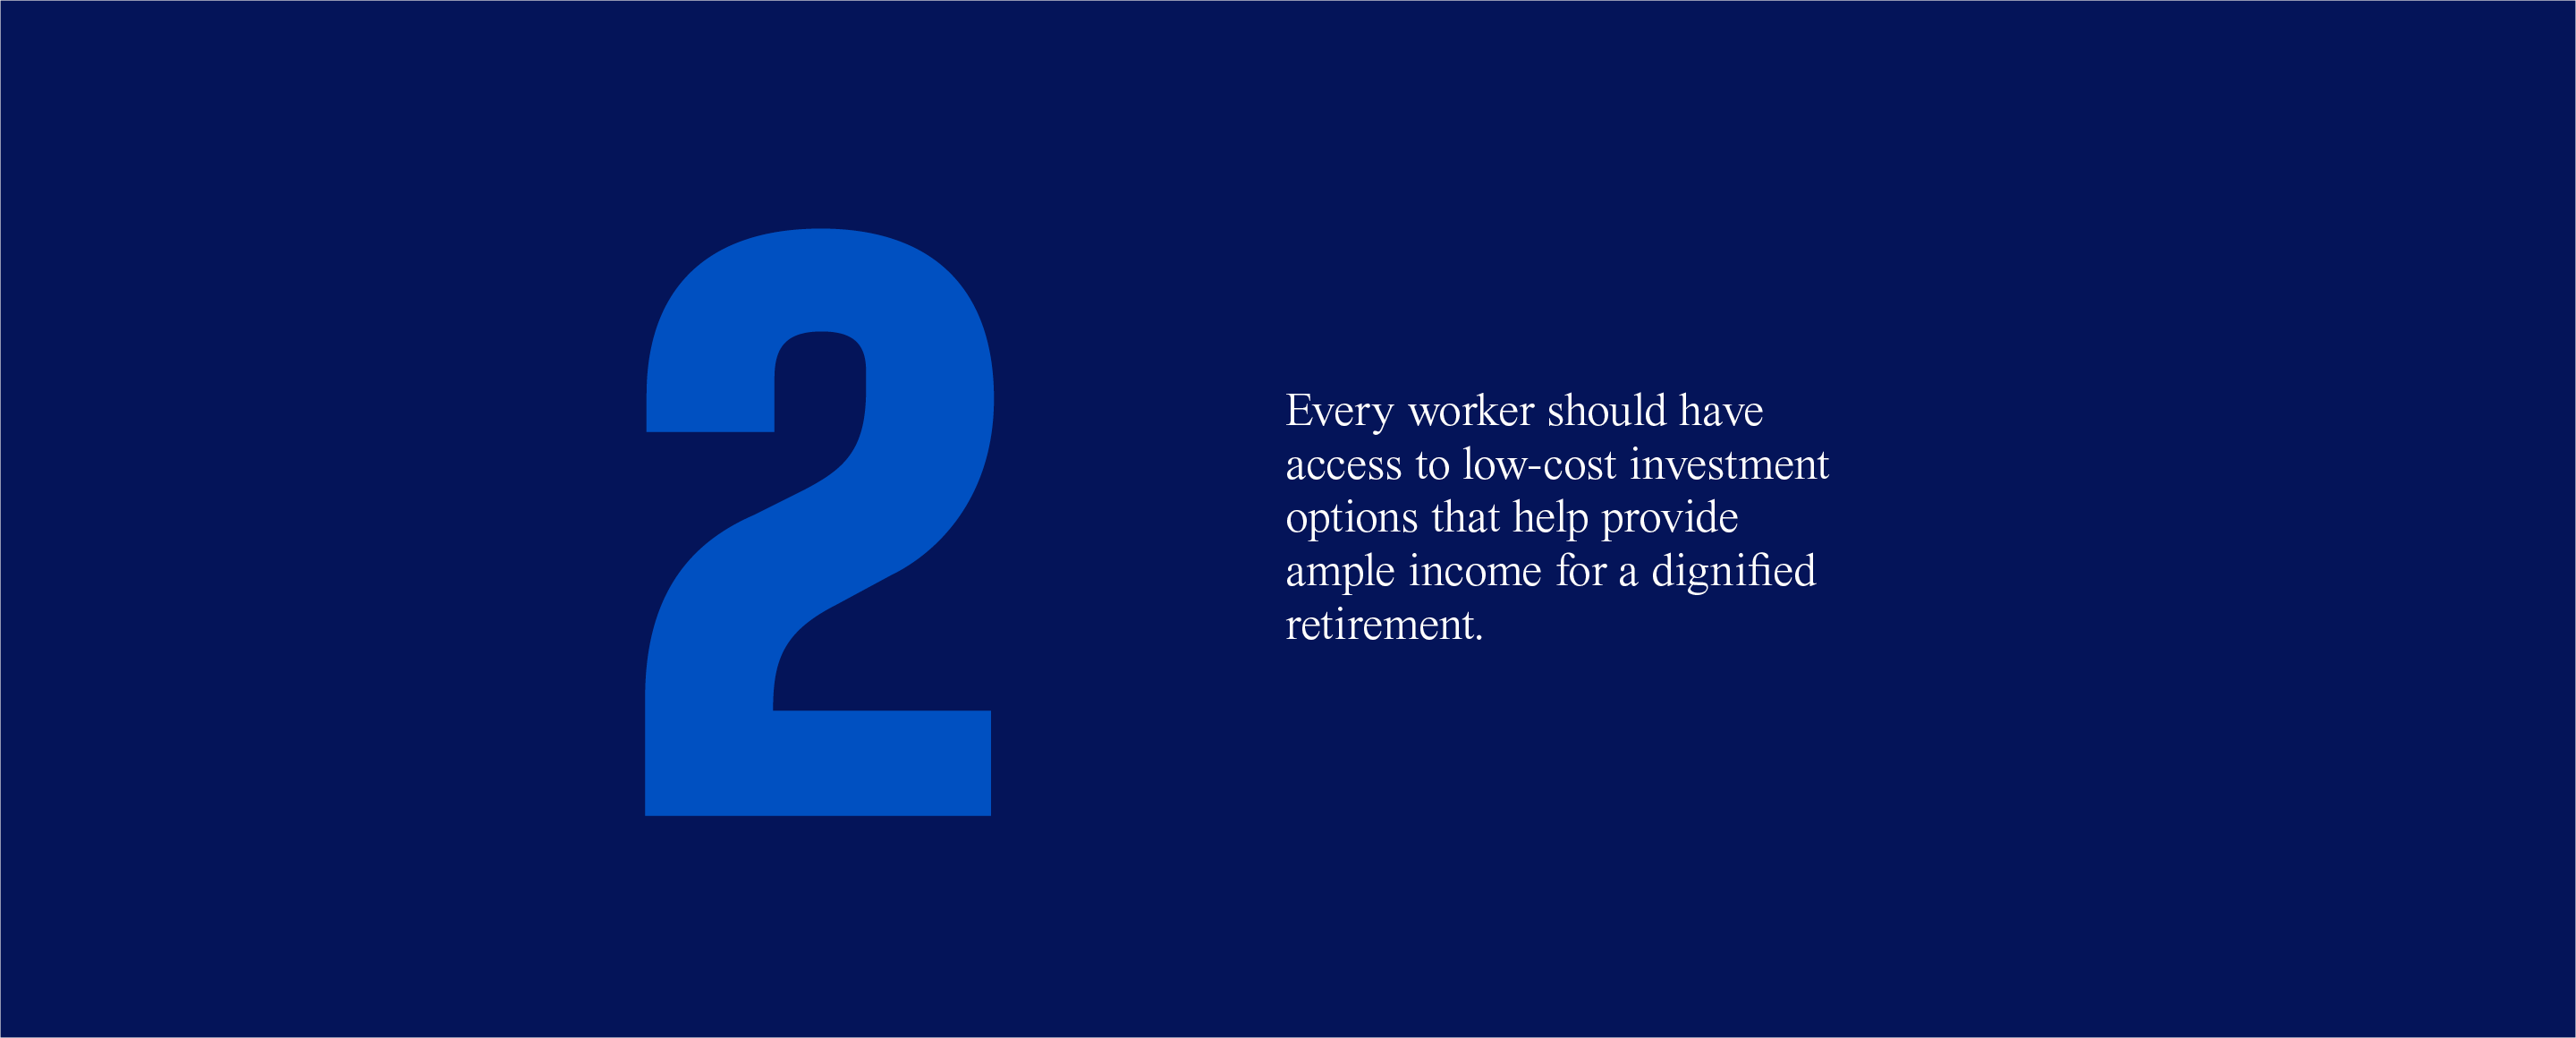 2. Every worker should have access to low-cost investment options that help provide ample income for a dignified retirement.